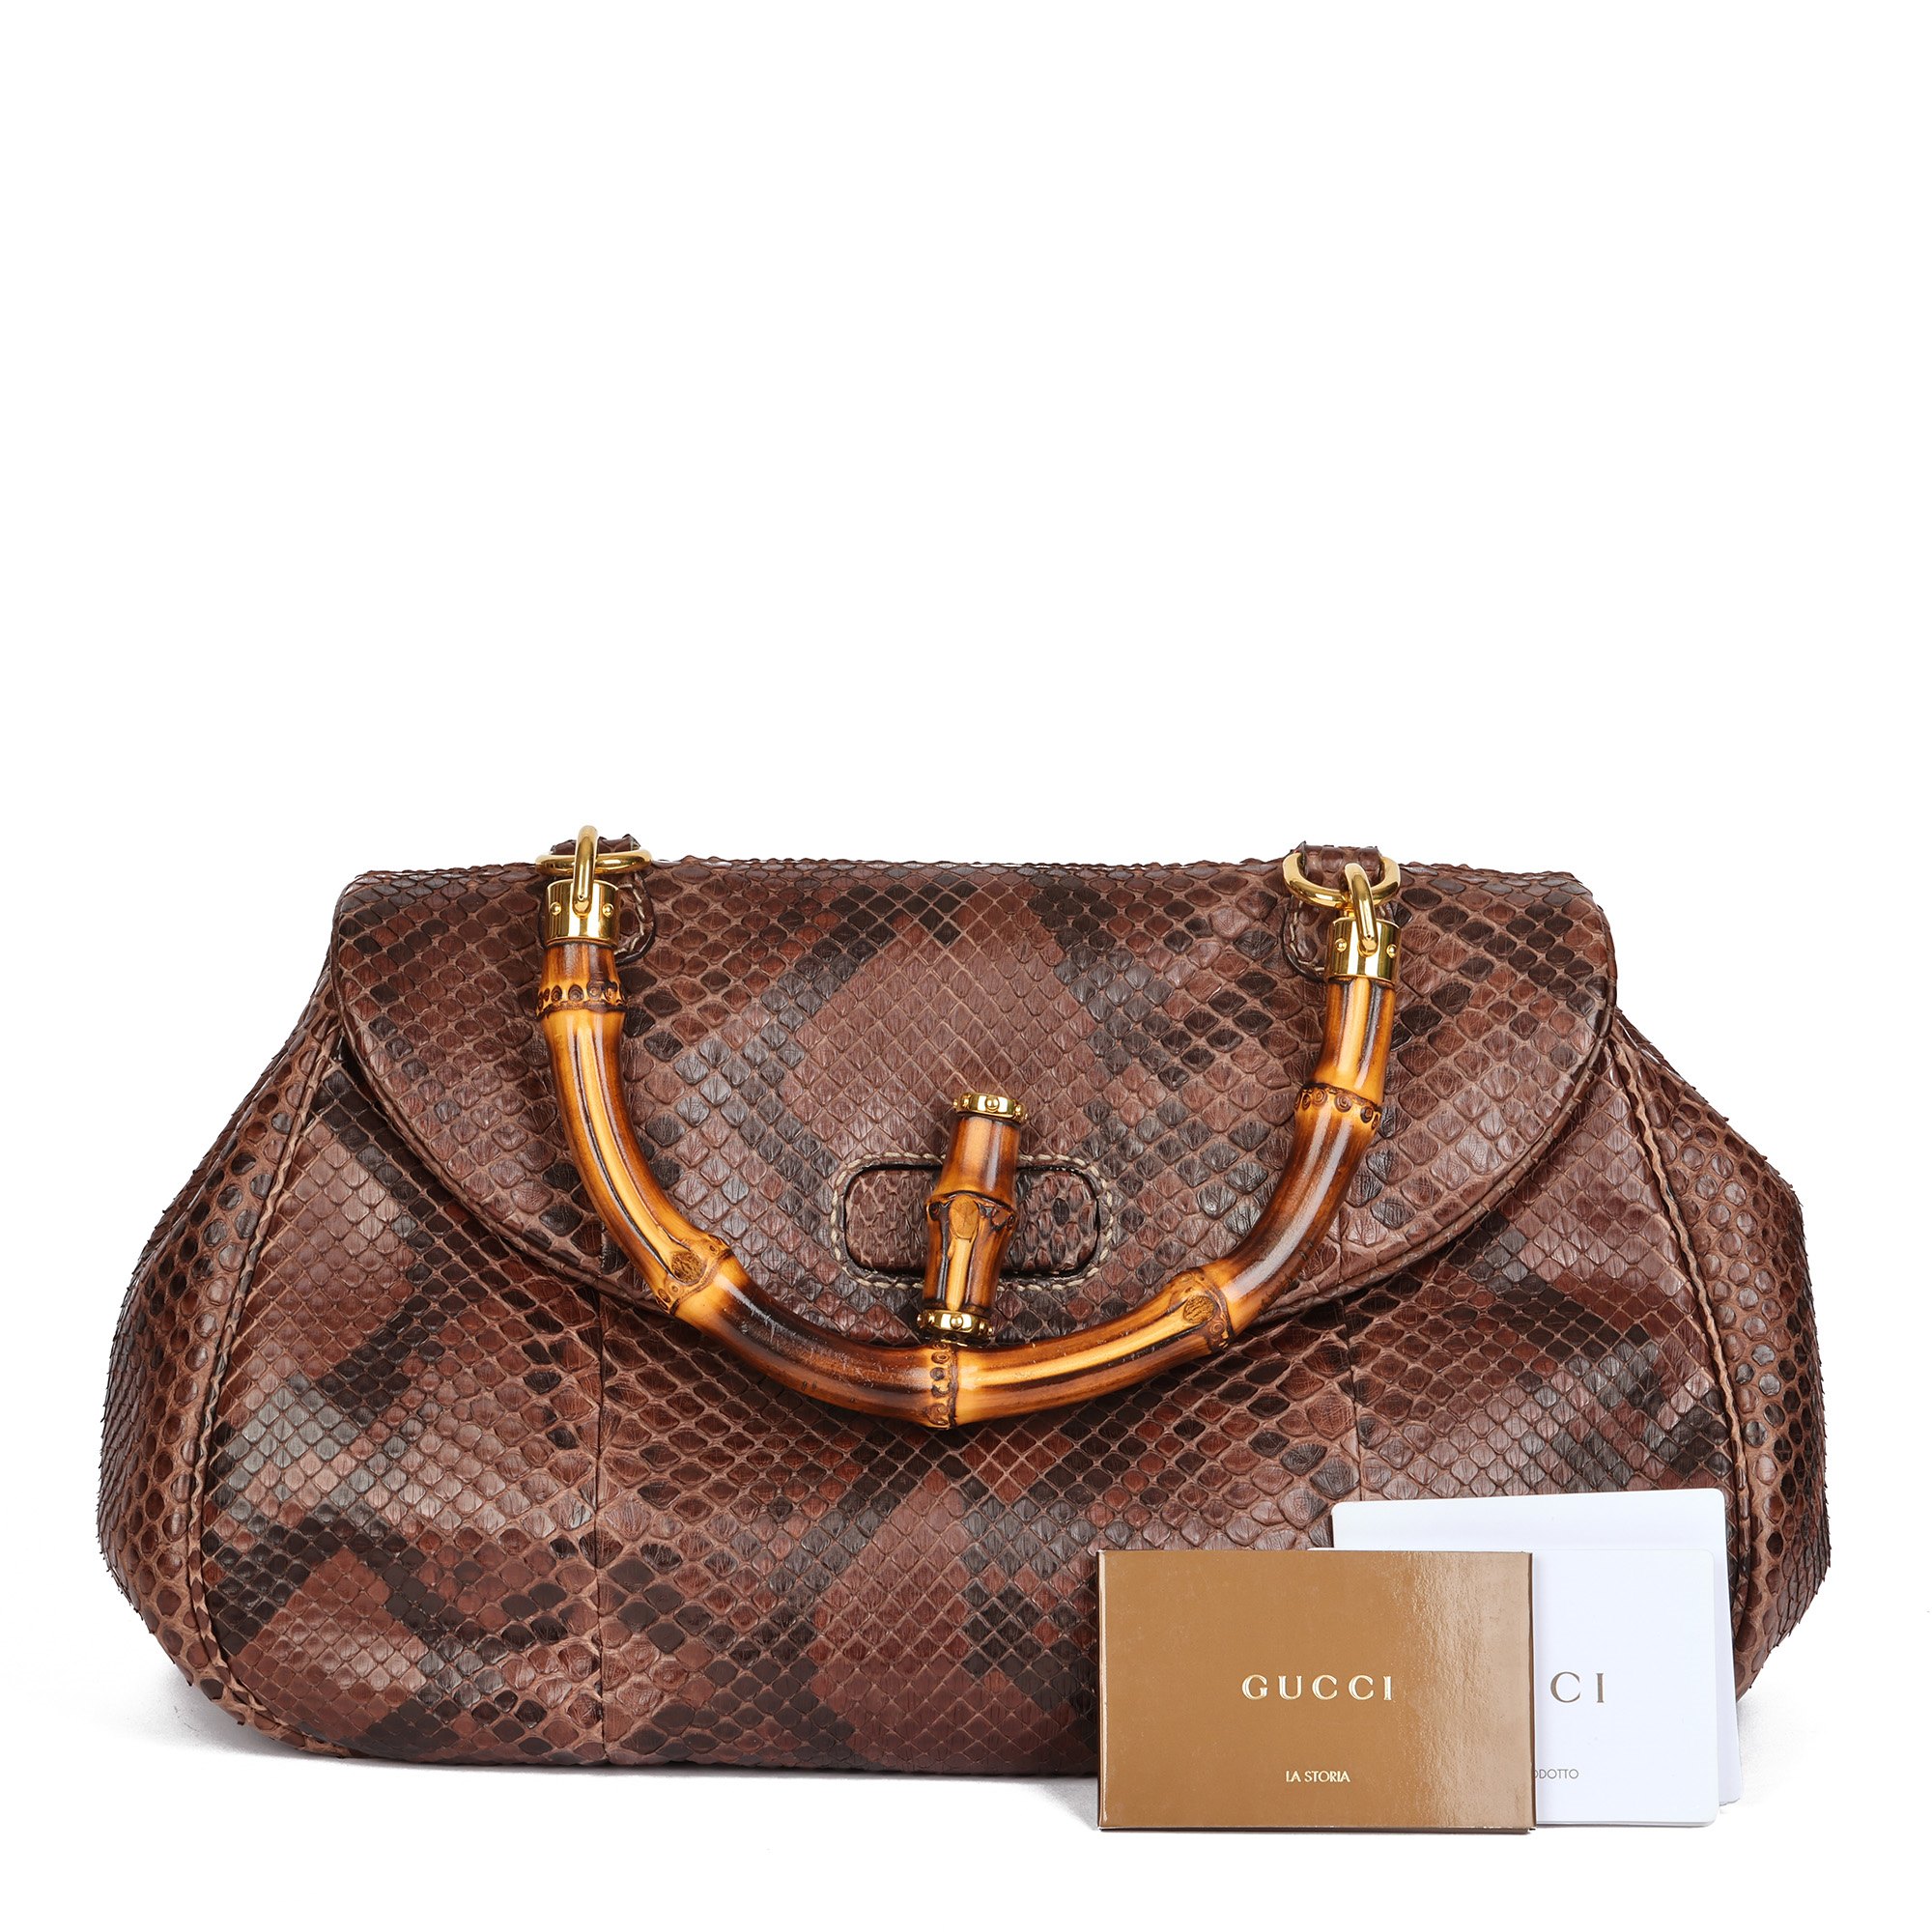 Gucci Brown Python Leather Vintage Bamboo Classic Top Handle